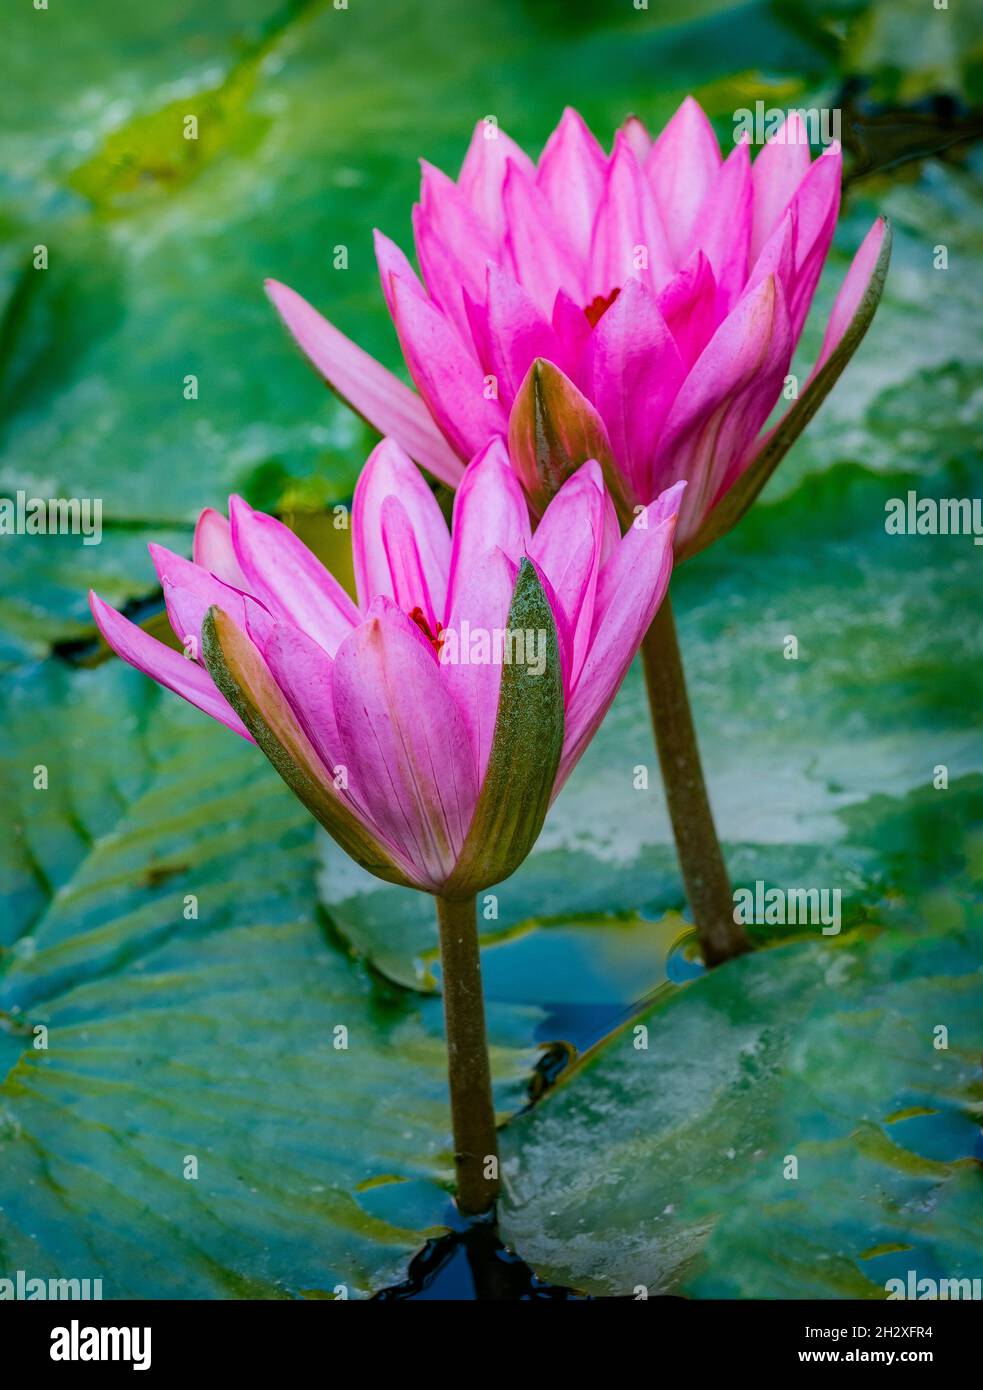 Beautiful pink purple flowers of water lily or lotus flower Nymphaea in old verdurous pond. Big leaves of waterlily cover water surface. Water plant c Stock Photo